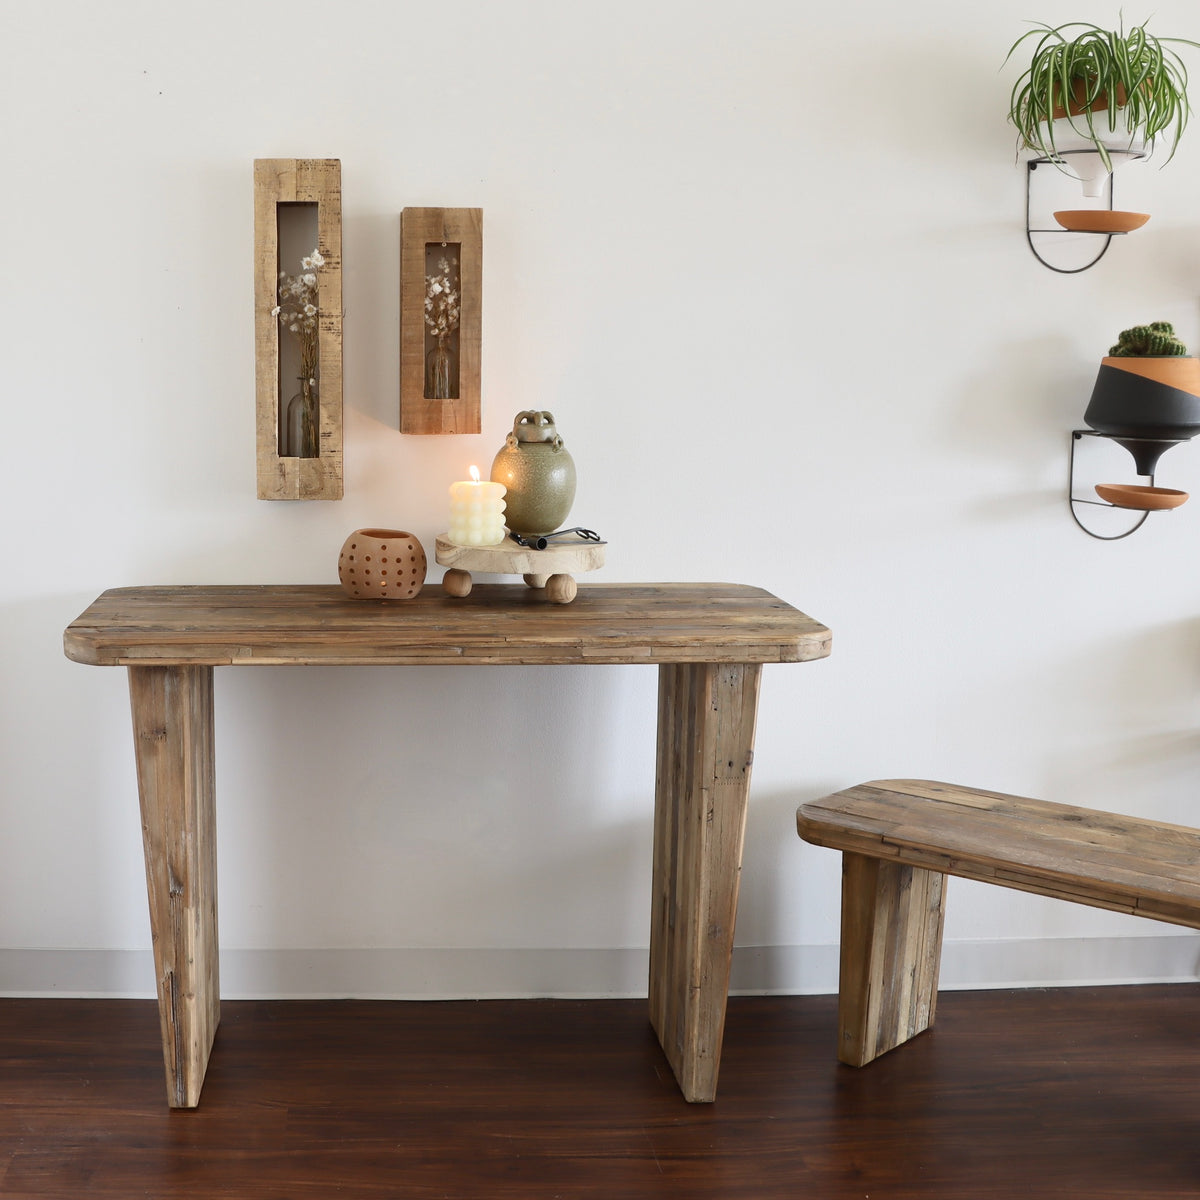 Ember Recycled Wooden Table - Holistic Habitat 